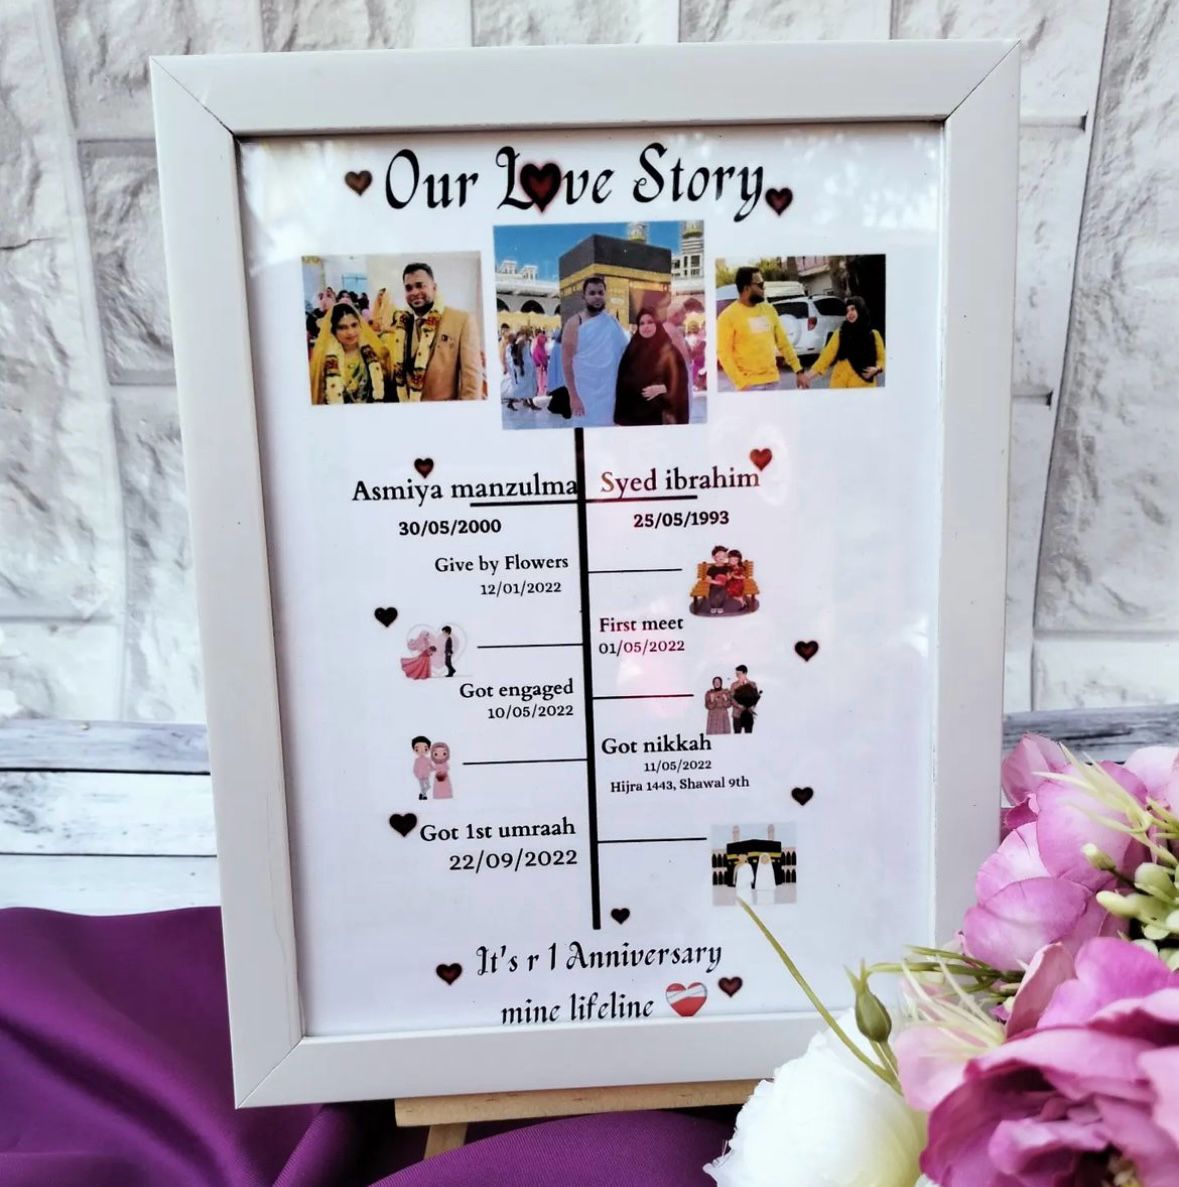 Our Love Story Photo Frame